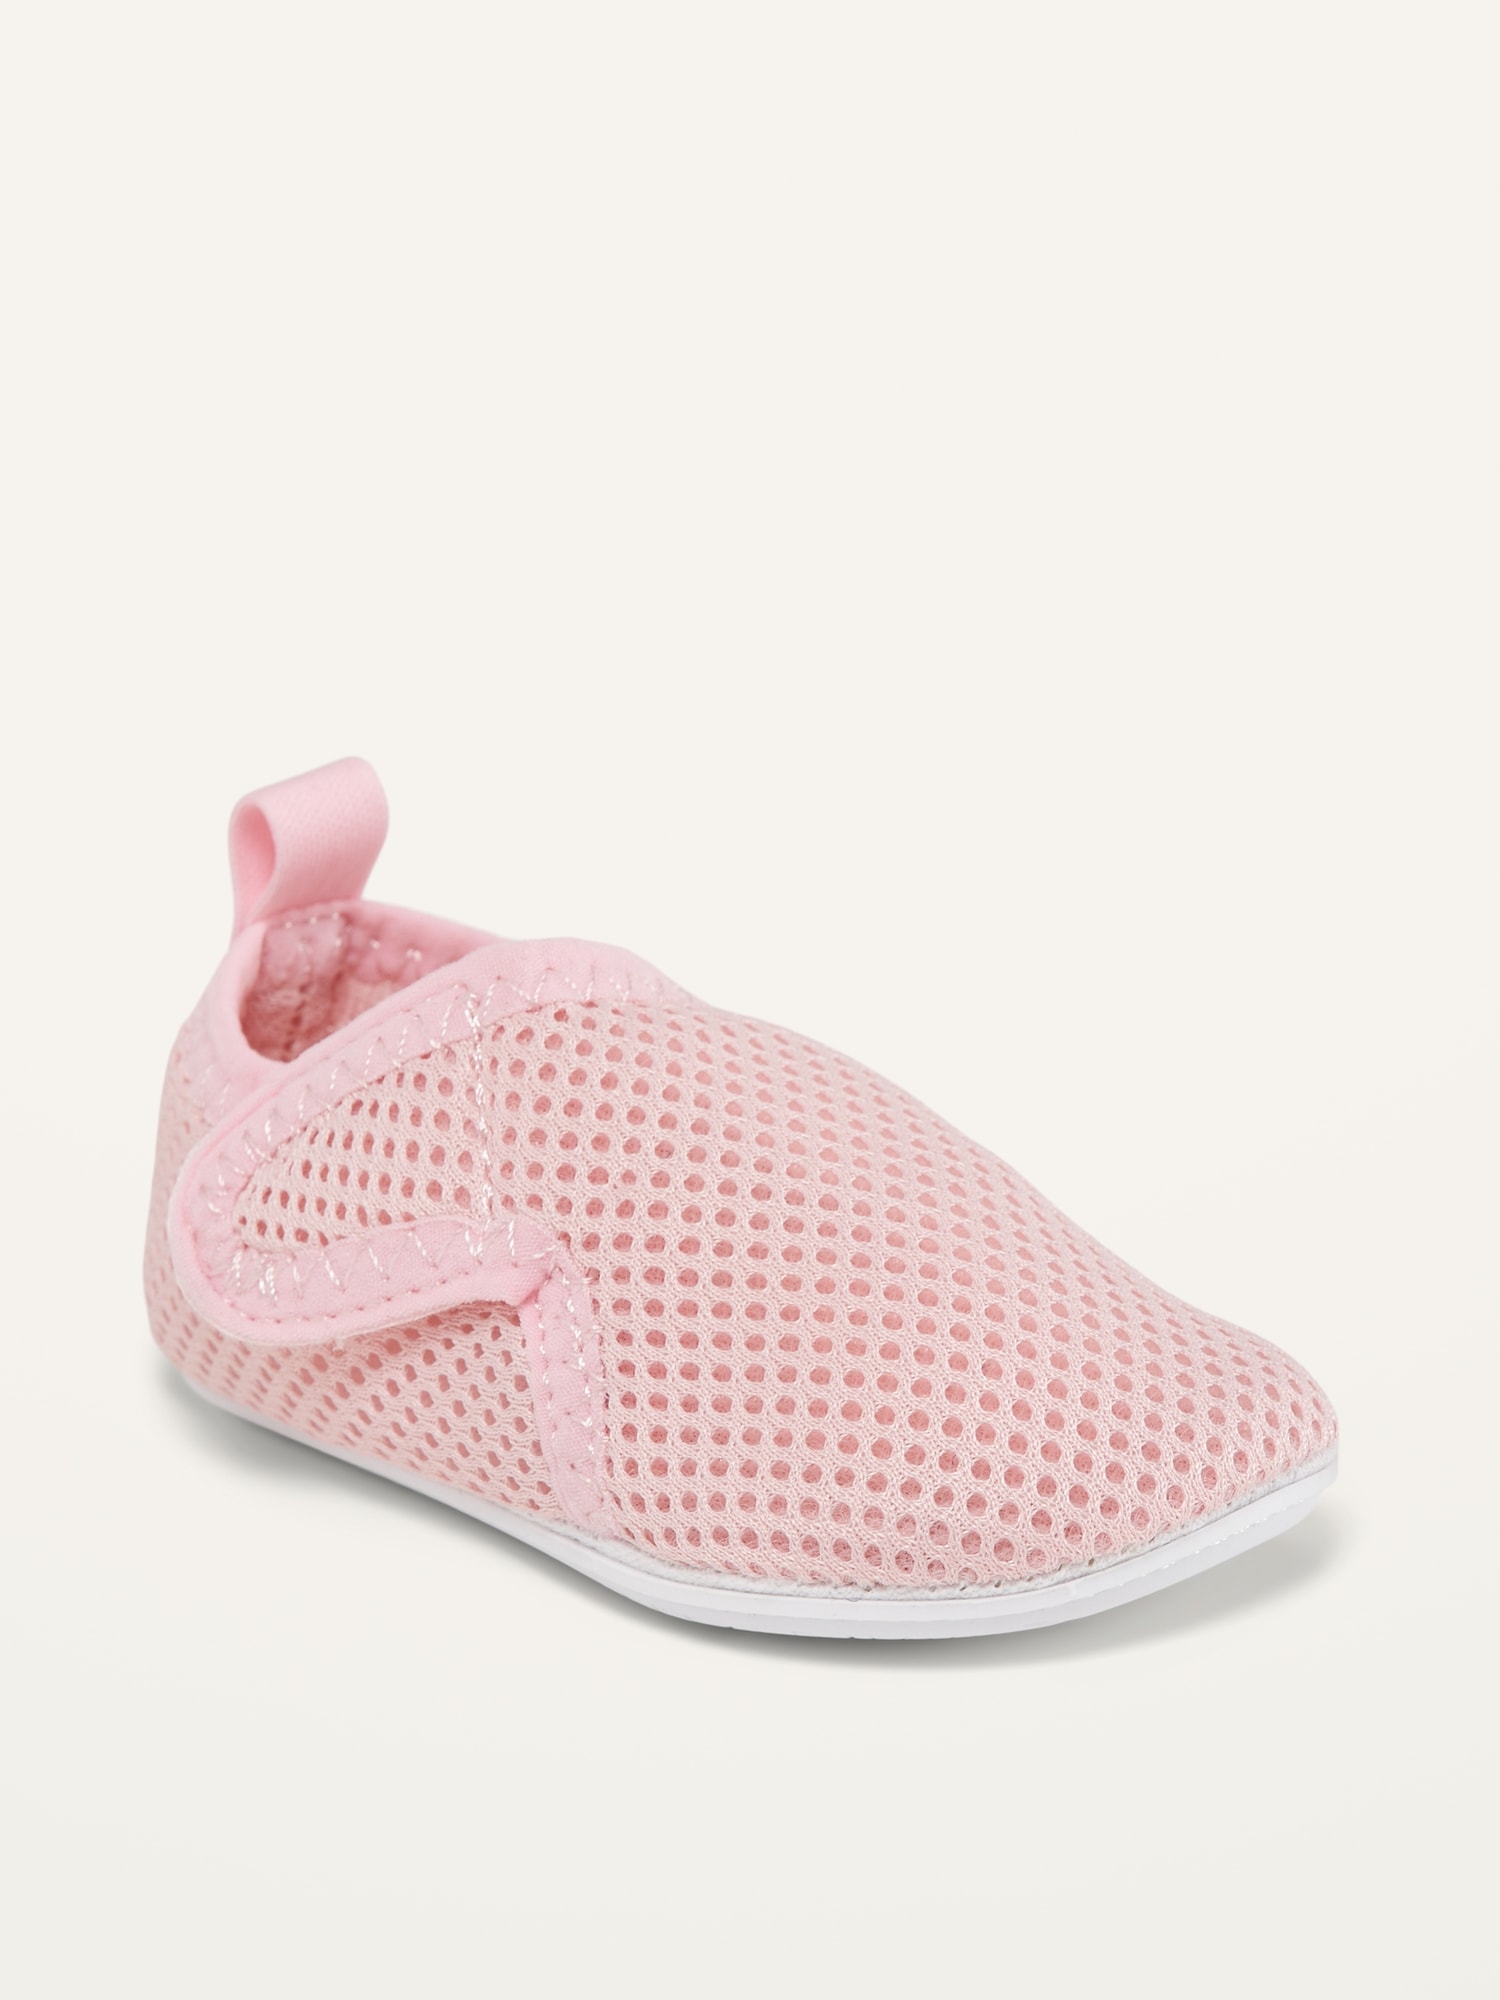 Unisex Mesh Swim Shoes for Baby | Old Navy